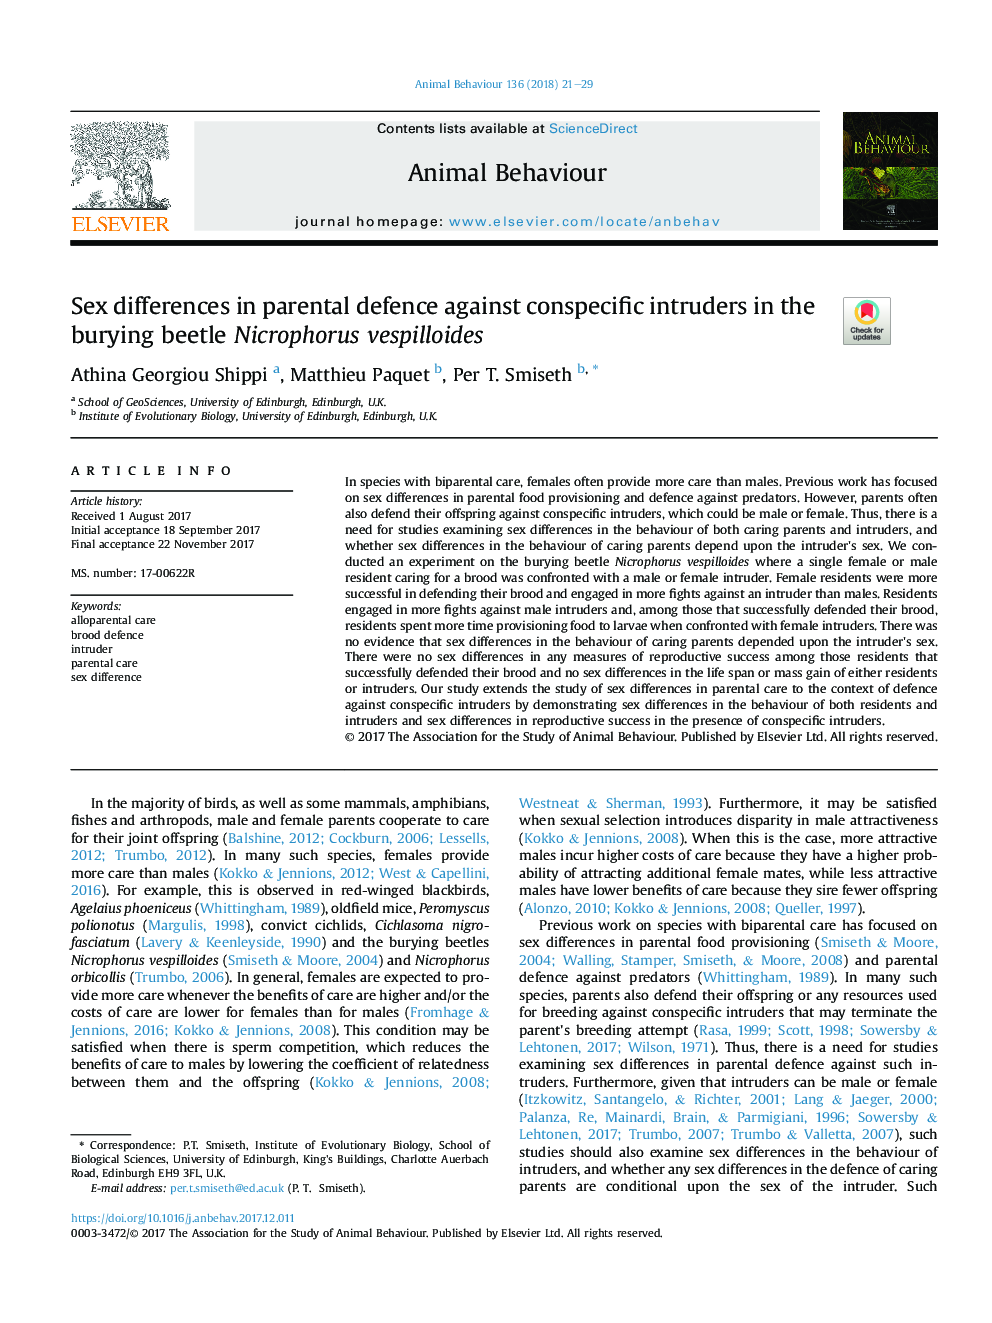 Sex differences in parental defence against conspecific intruders in the burying beetle Nicrophorus vespilloides